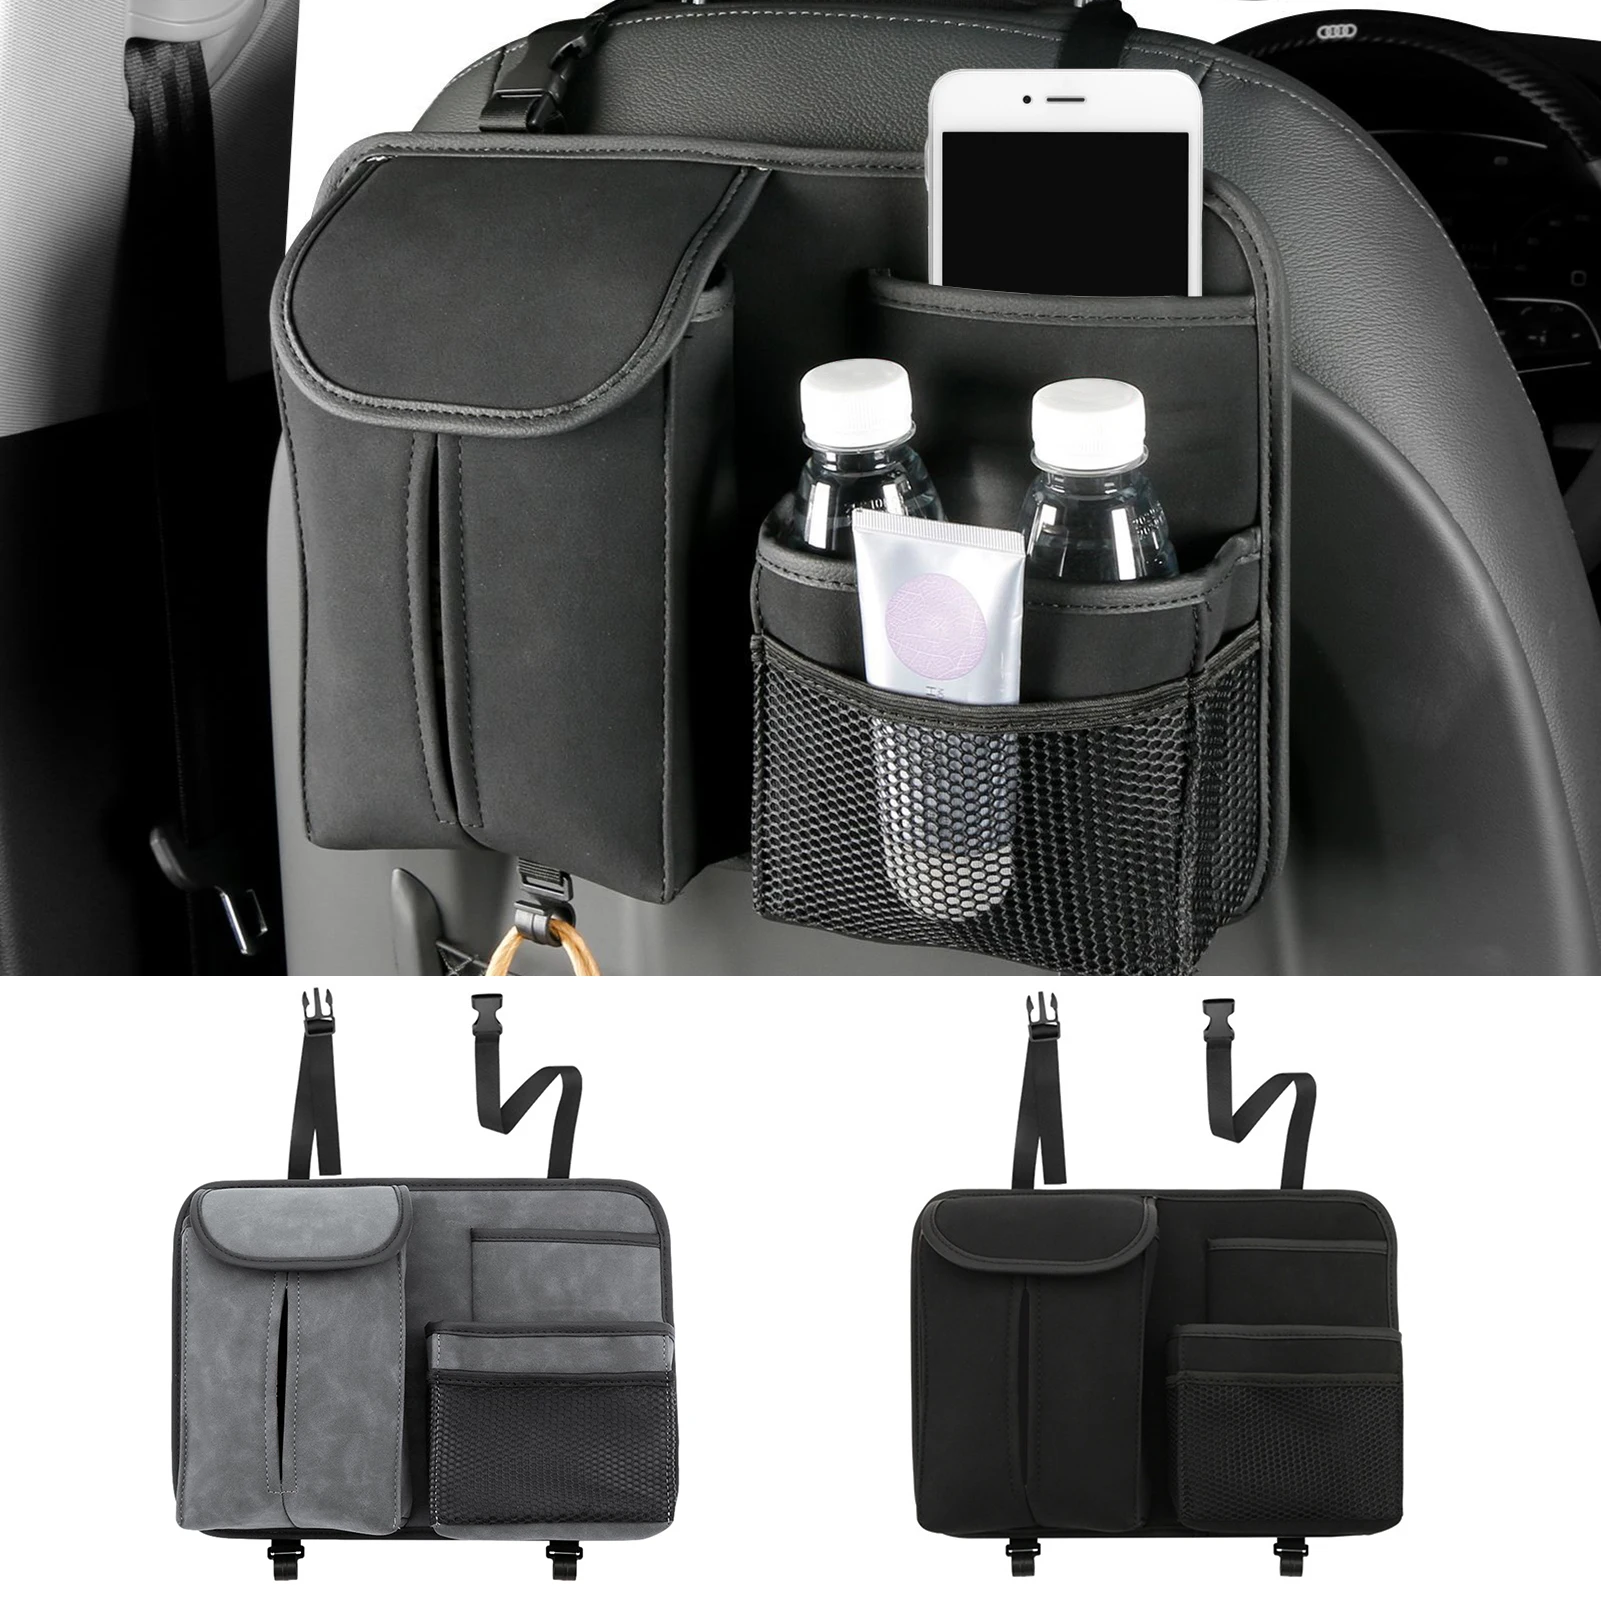 

Backseat Car Organizer Suede Car Tissue Holder Back Seats With 3 Pockets For Cups Phones And Hooks For Bags Car Organizer